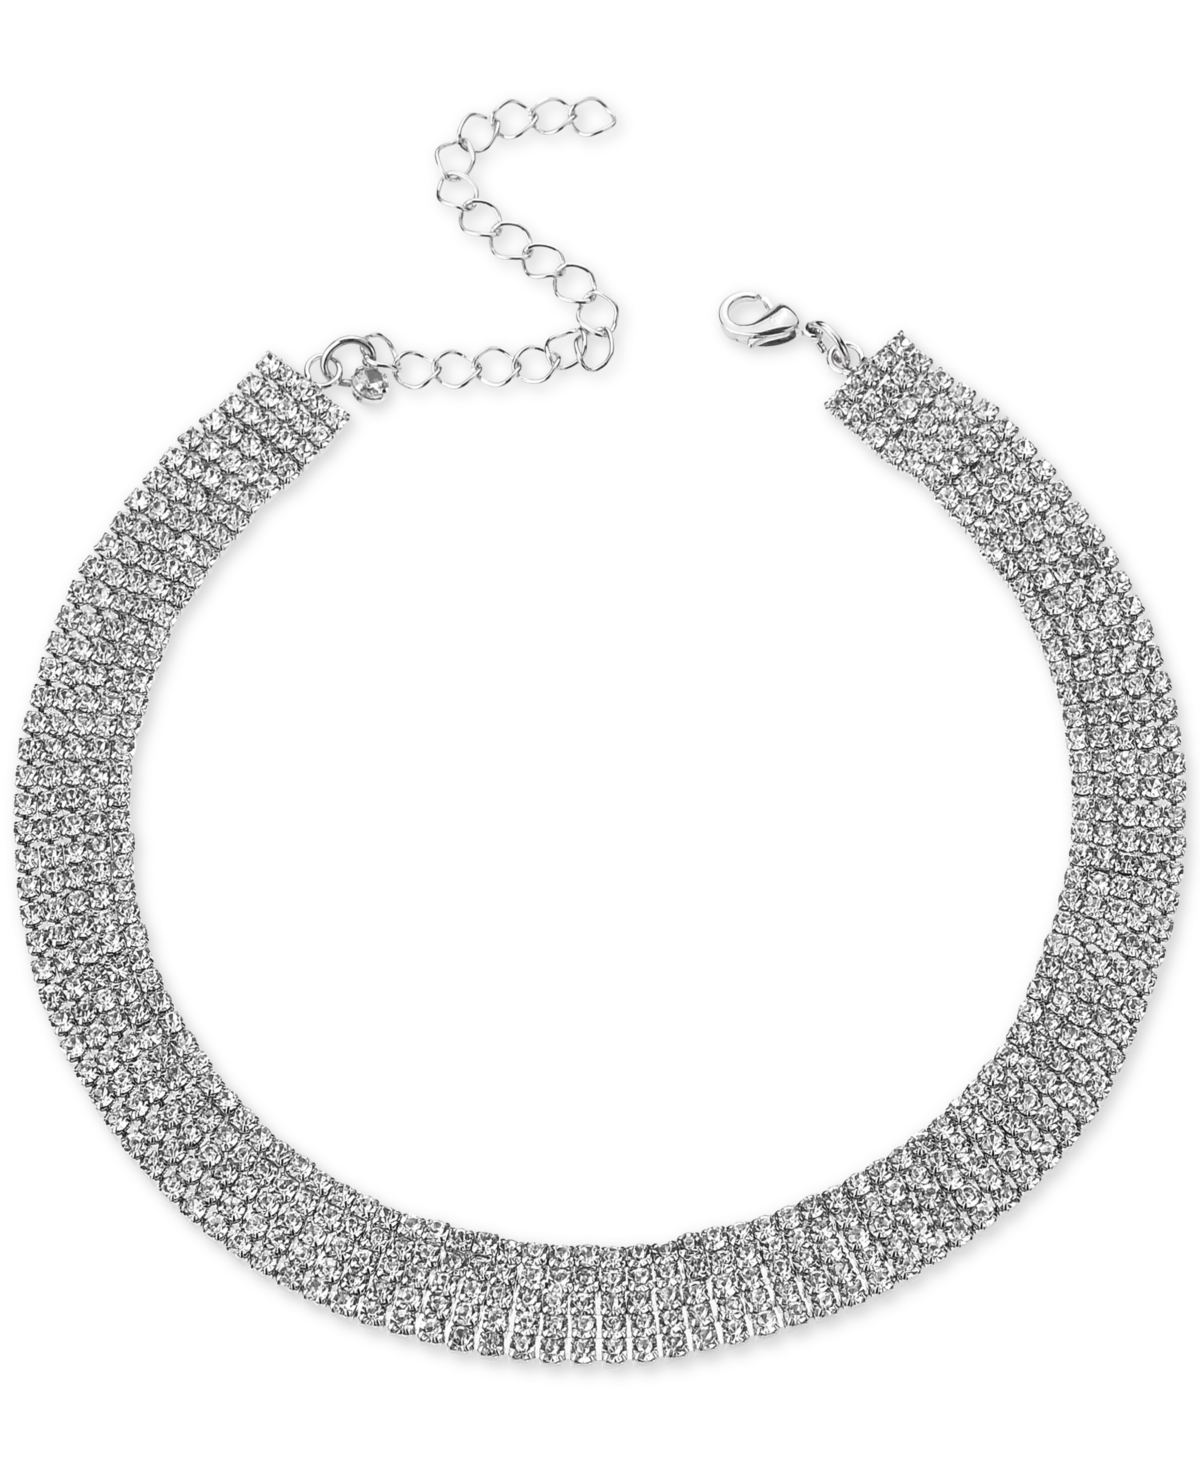 Silver-Tone Rhinestone Wide Choker Necklace, 13" + 3" extender, Created for Macy's - Silver